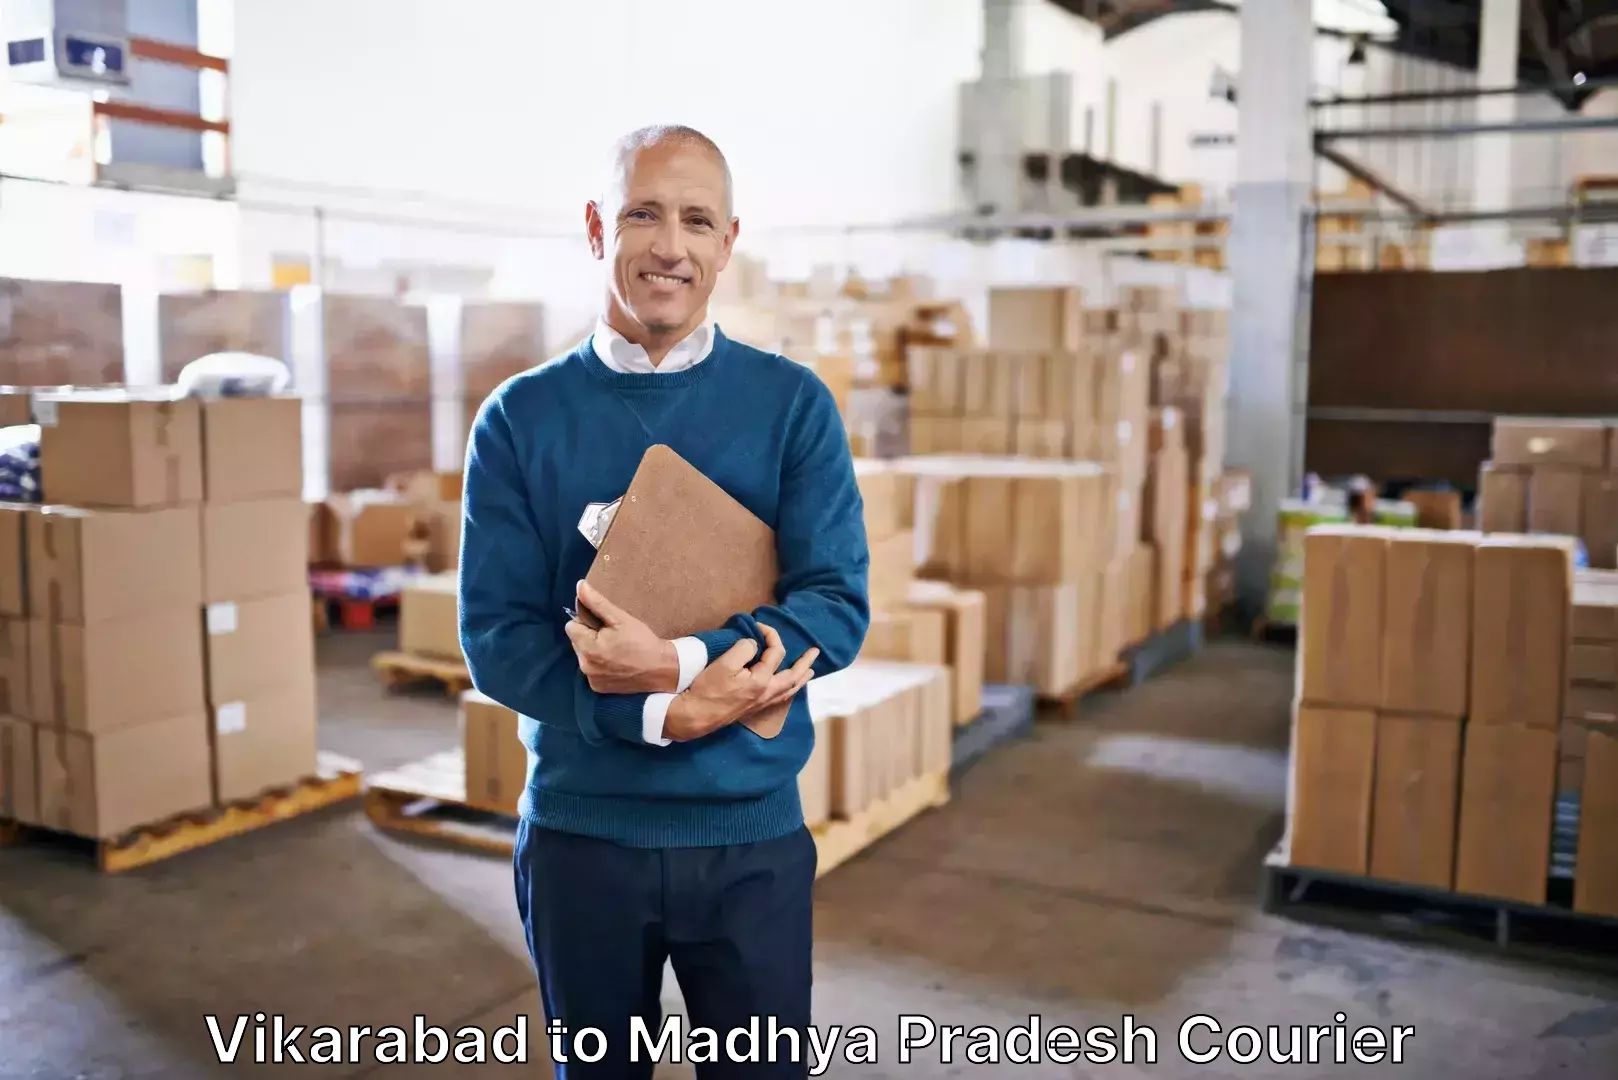 Personal effects shipping in Vikarabad to Bhind